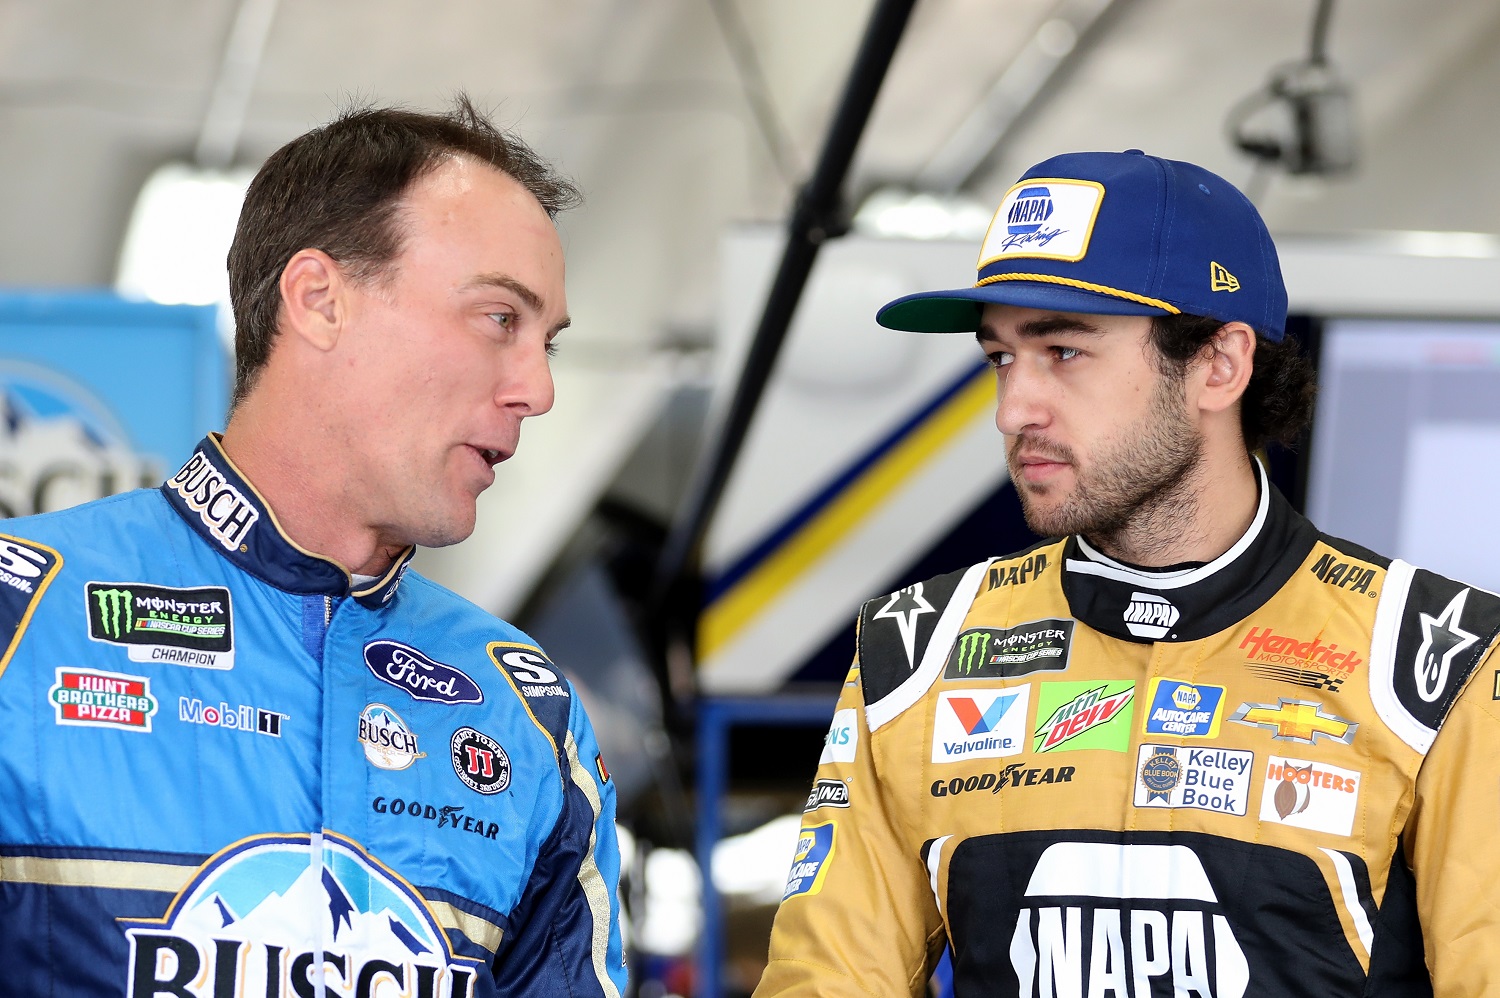 Kevin Harvick and Chase Elliott talk in the garage during practice for the NASCAR All-Star Race at Charlotte Motor Speedway on May 17, 2019. | Streeter Lecka/Getty Images